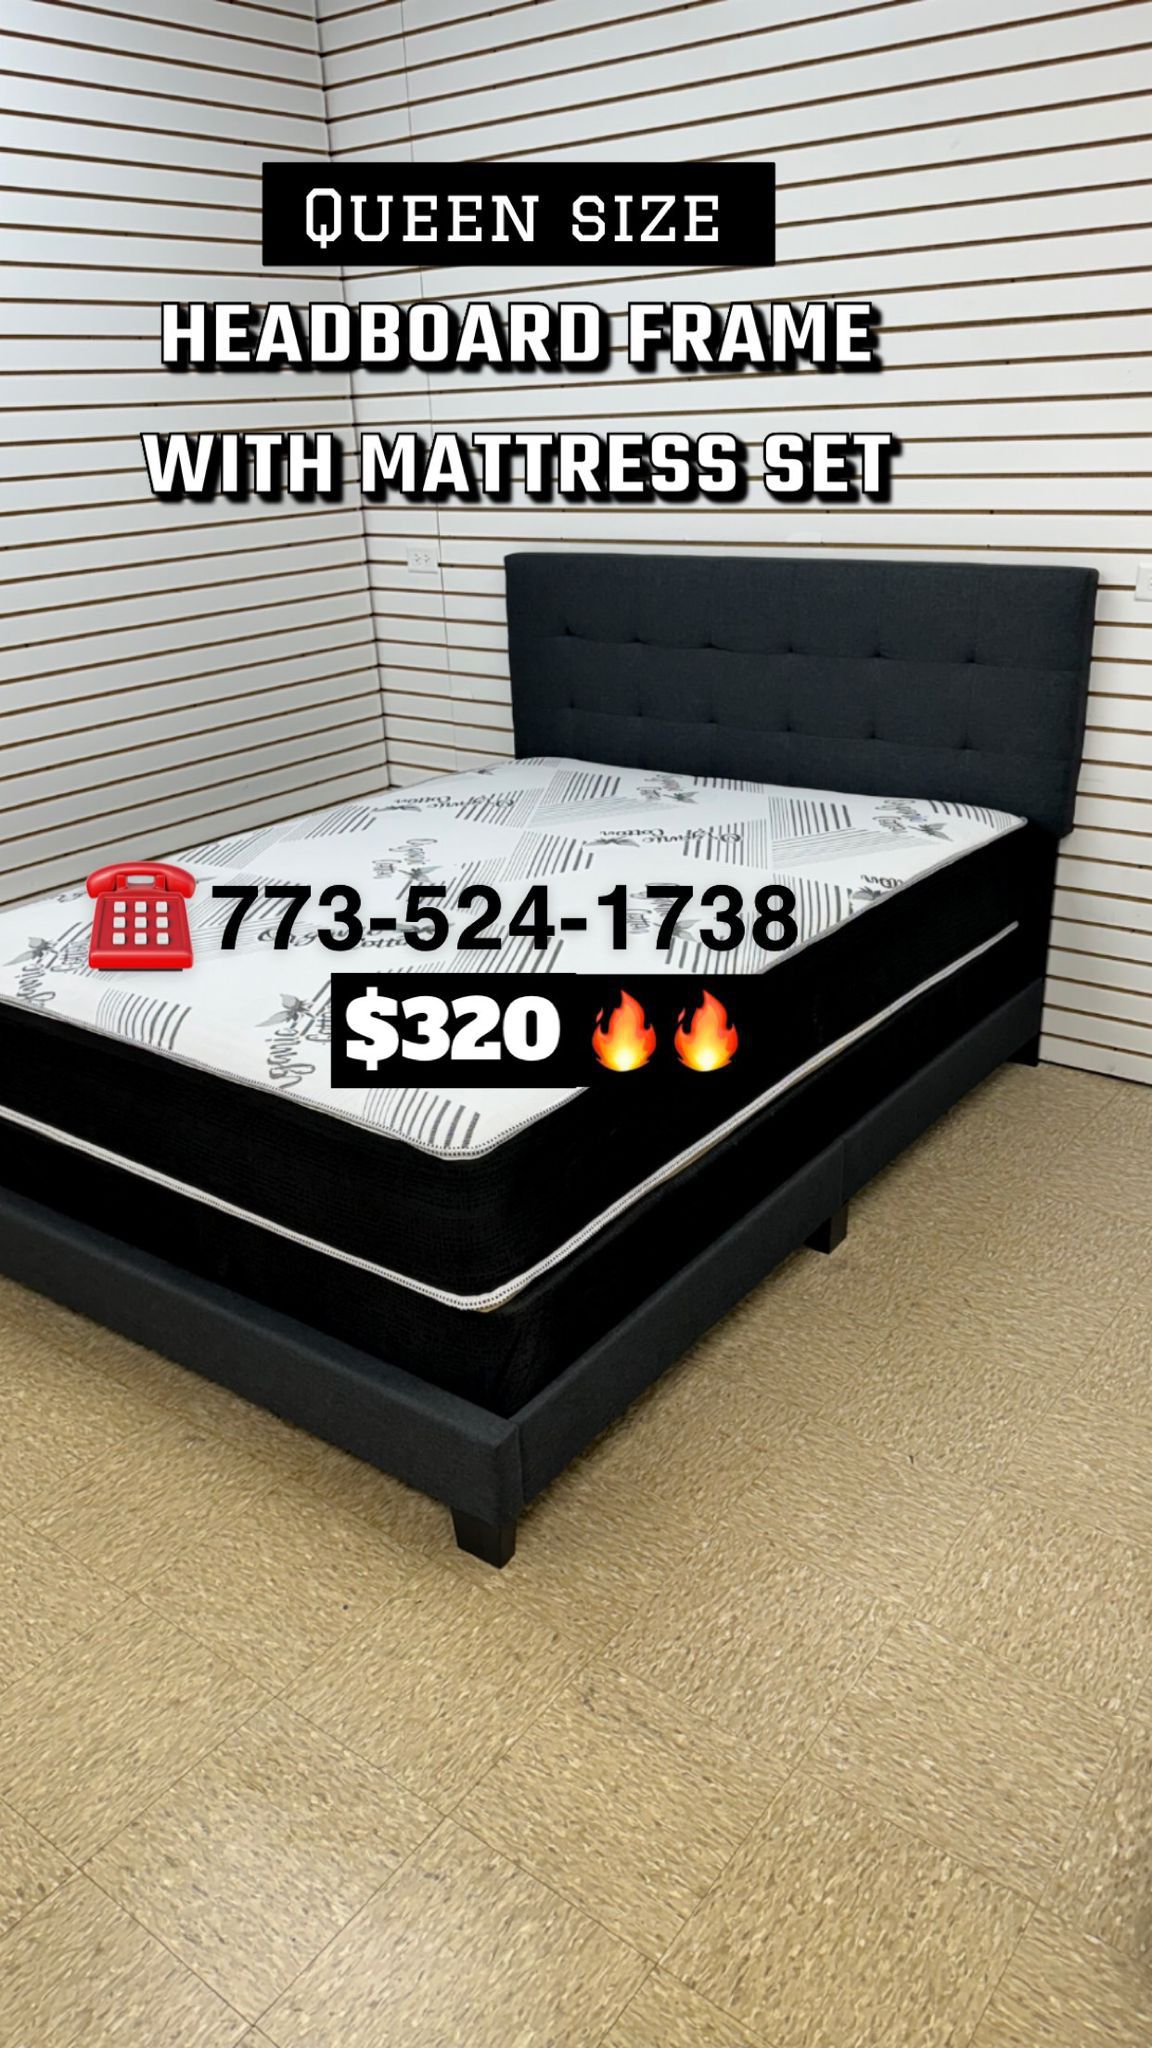 Queen Bed Headboard Footboard Mattress Box Spring All Included Brand New In Box 📦 Same Day Delivery 🚚 